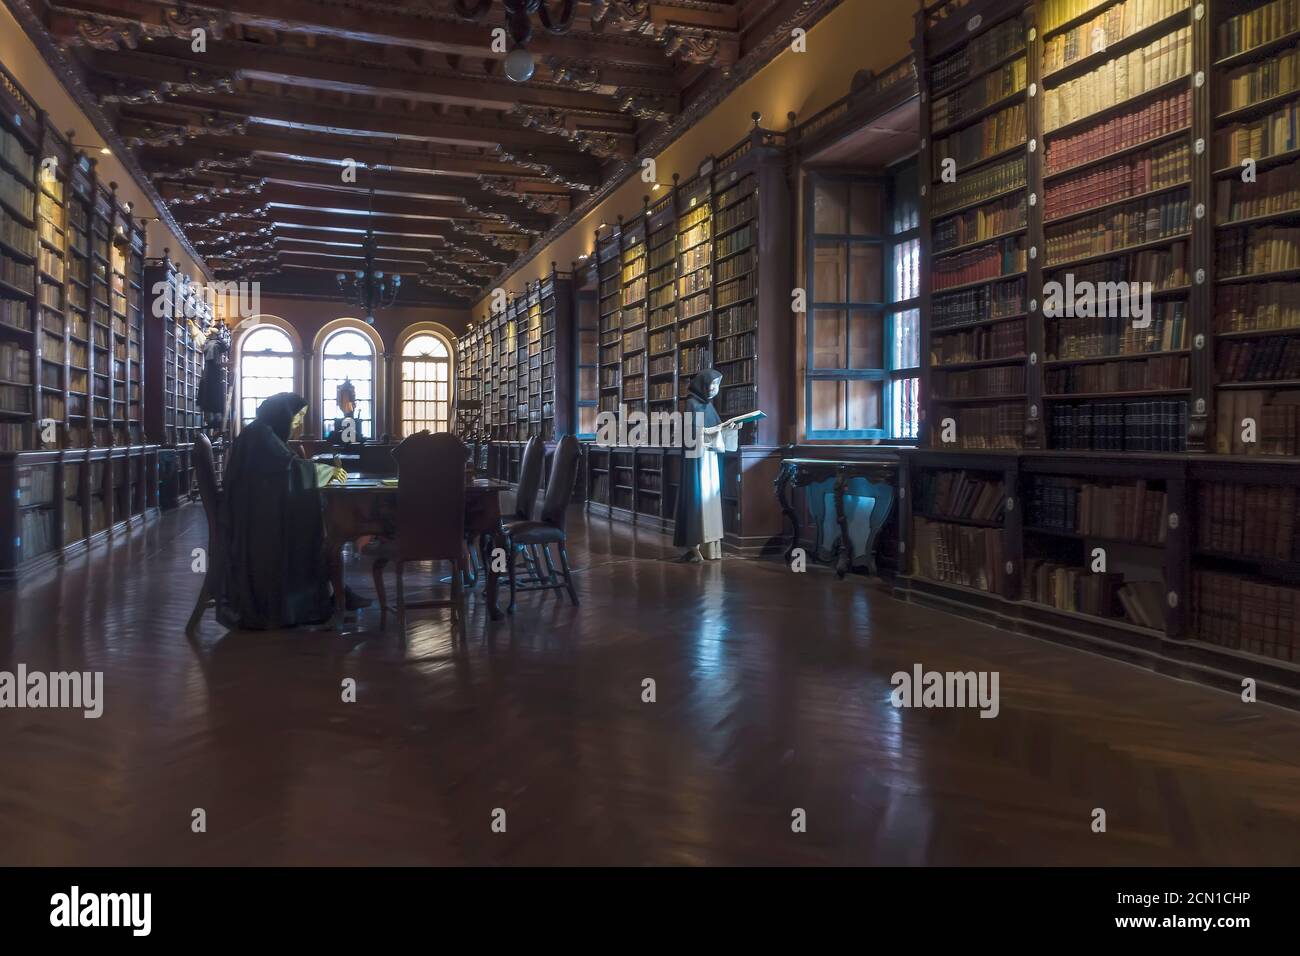 models of monks reading a manuscript in old library of Santo Domingo Convent, Lima, Peru Stock Photo